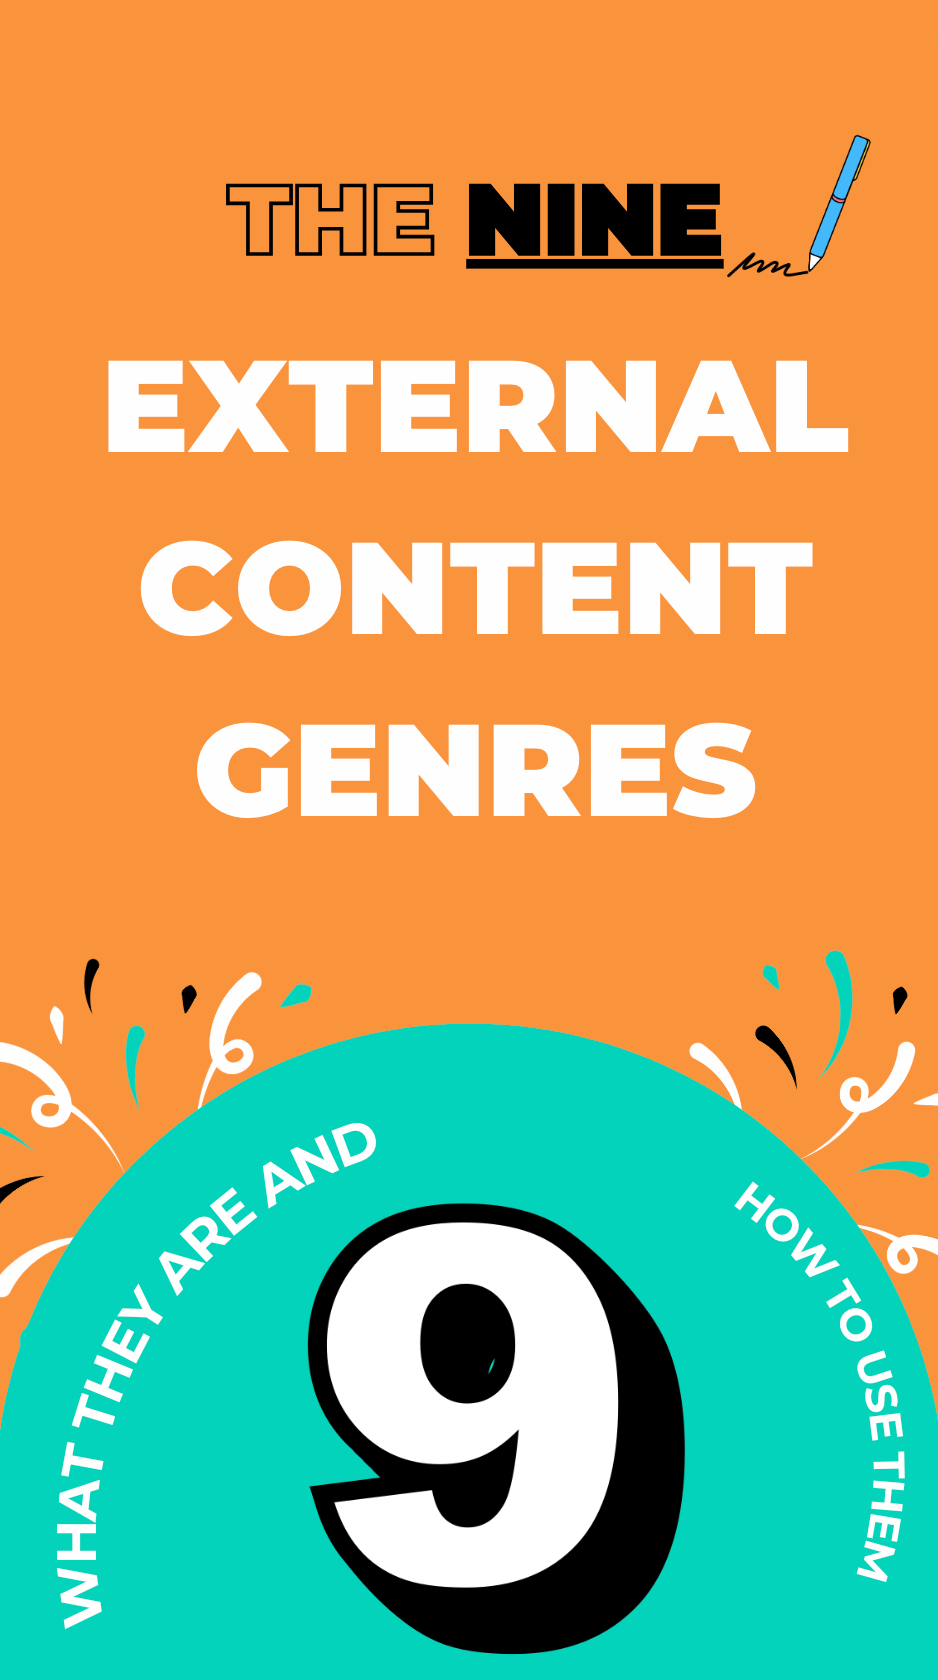 THE 9 EXTERNAL CONTENT GENRES: WHAT THEY ARE AND HOW TO USE THEM FOR MARKETING YOUR NEXT BOOK